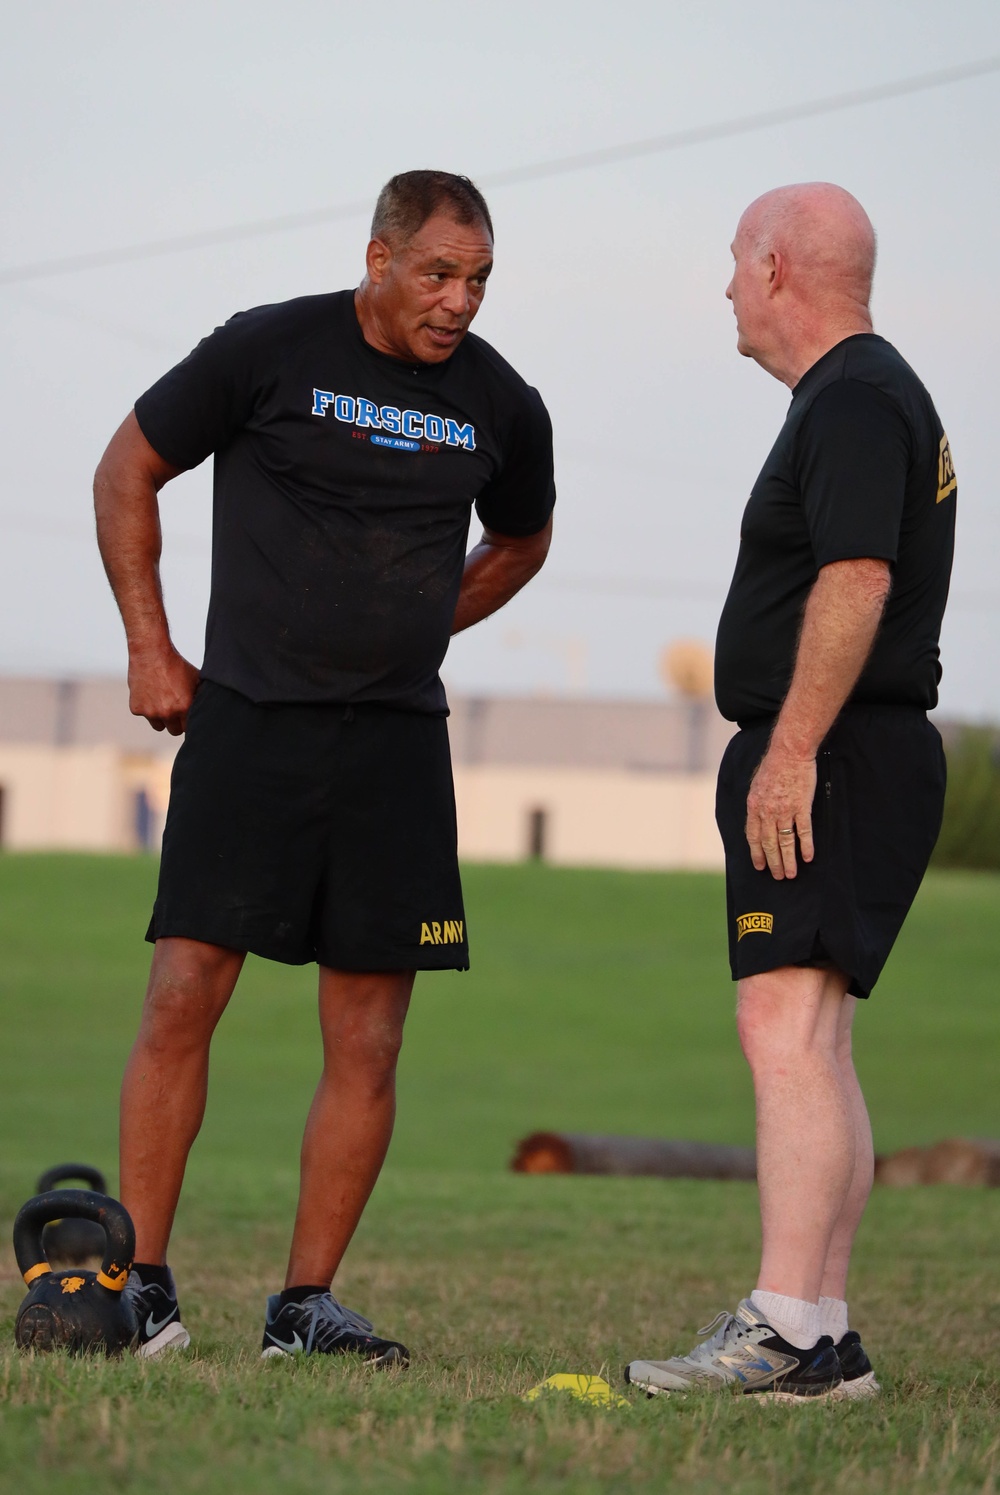 36th Engineer Brigade conducts physical training with the FORSCOM Command team